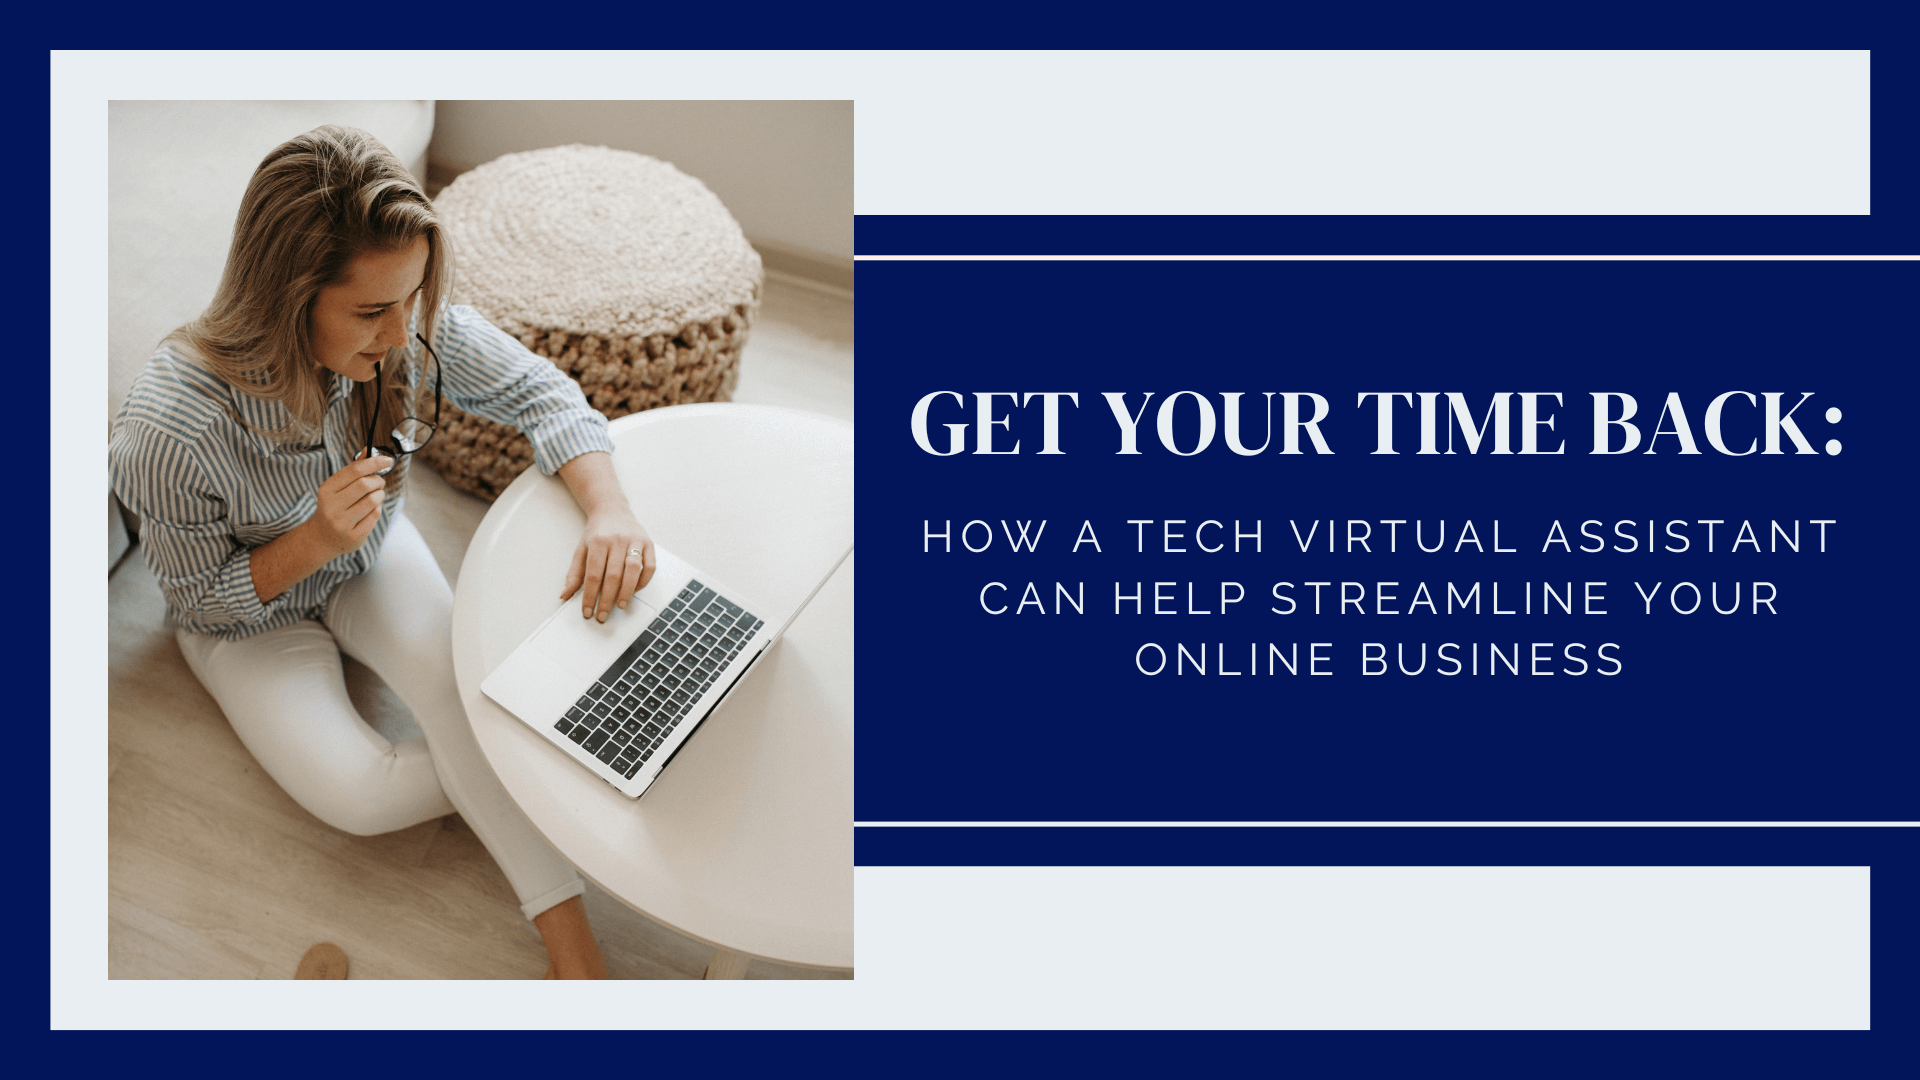 Get Your Time Back: How a Tech Virtual Assistant Can Help Streamline Your Online Business